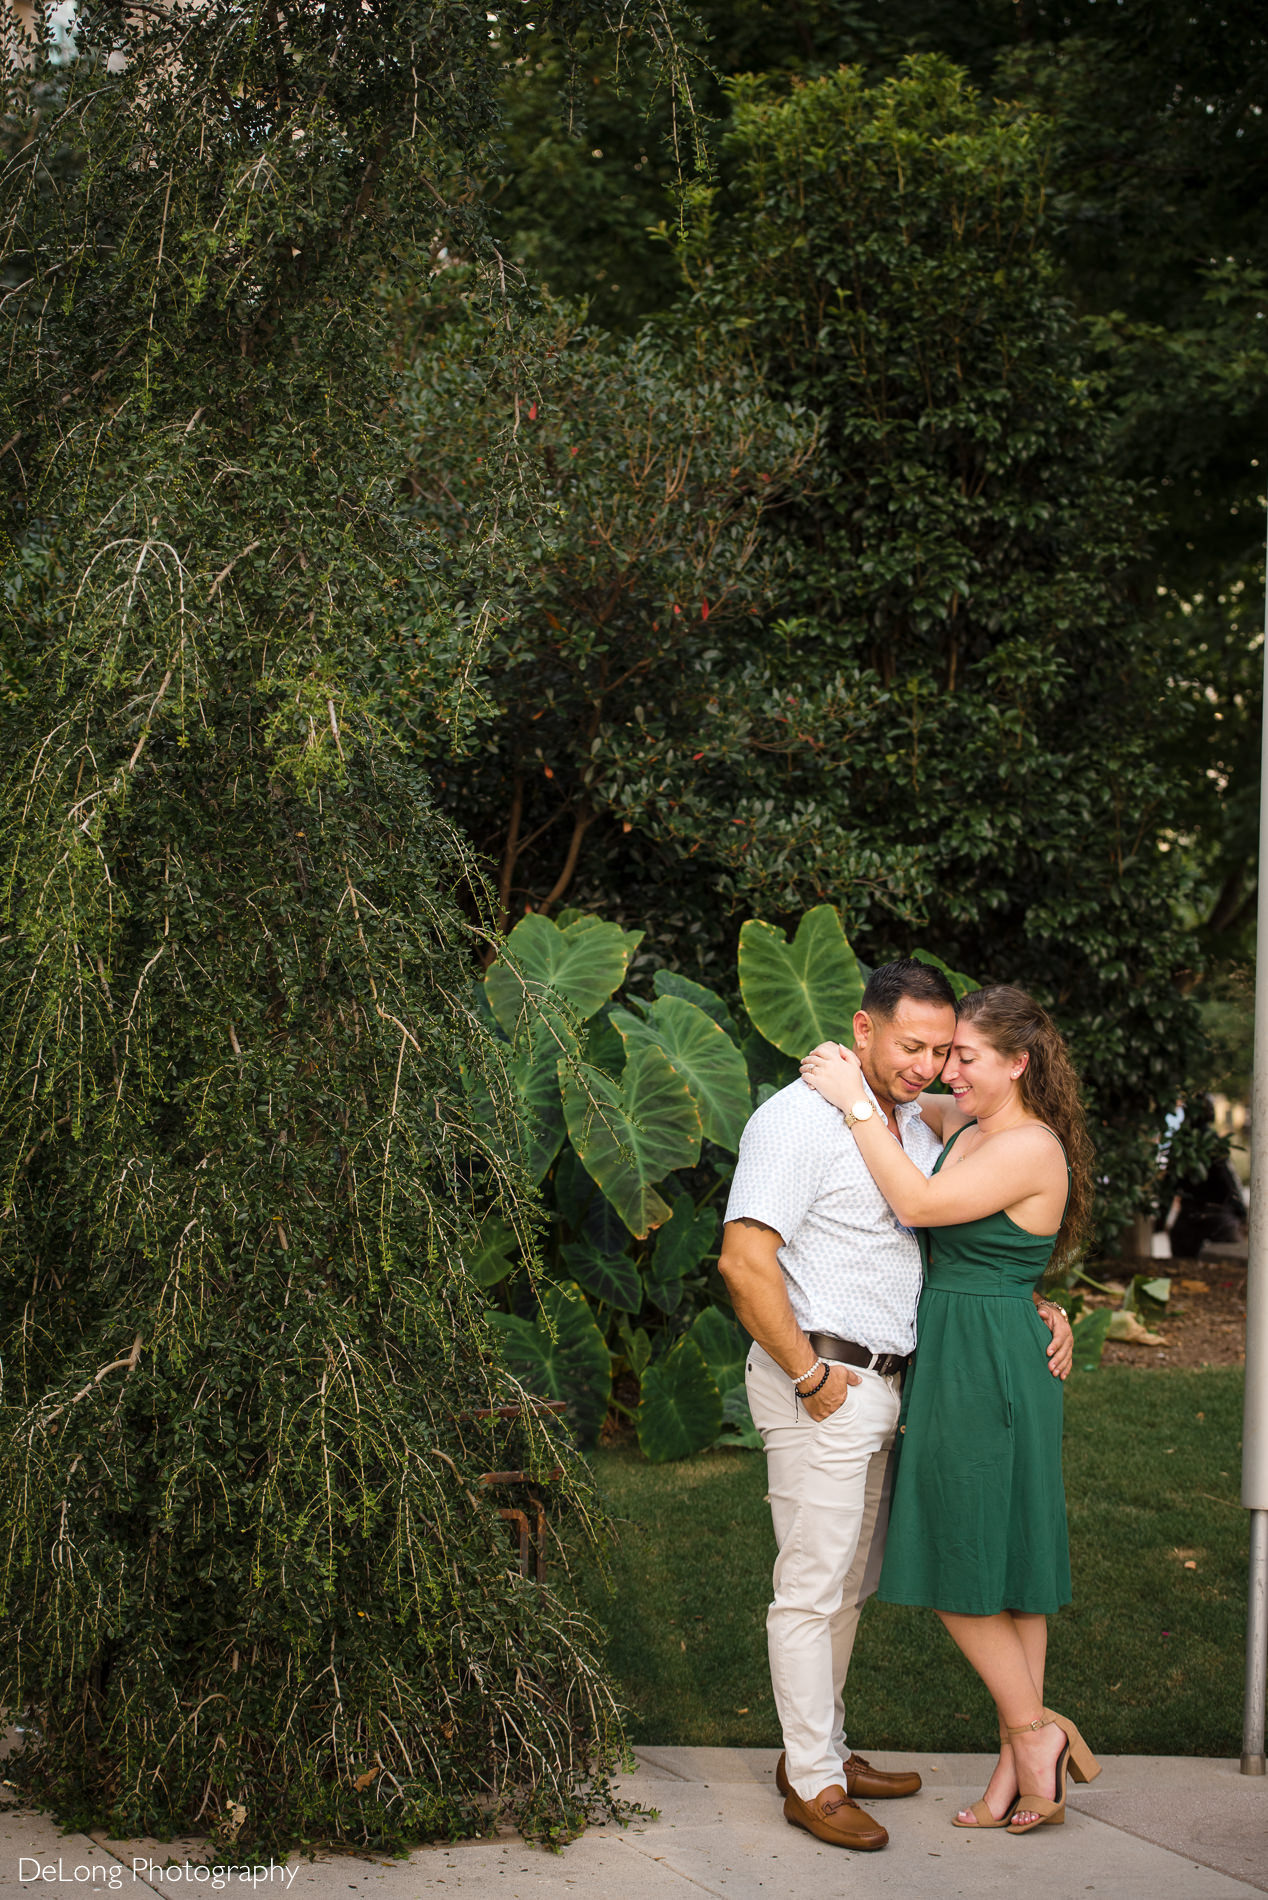 Couple snuggling with arms around each other surrounded by greenery during a Romare Bearden Park engagement session by Charlotte wedding photographers DeLong Photography